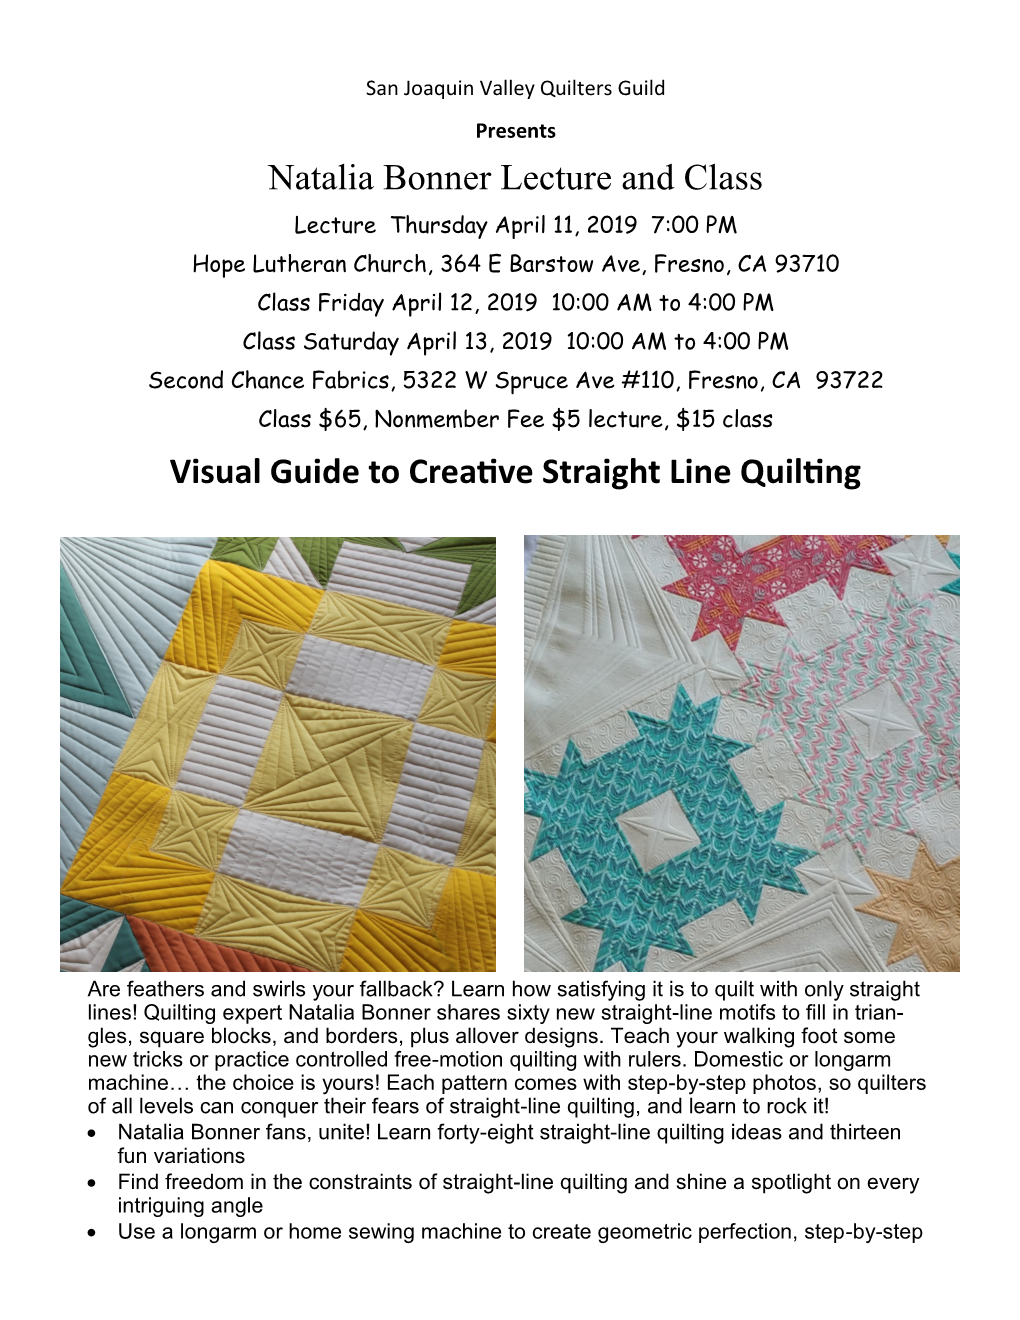 Natalia Bonner Lecture and Class Visual Guide to Creative Straight Line Quilting